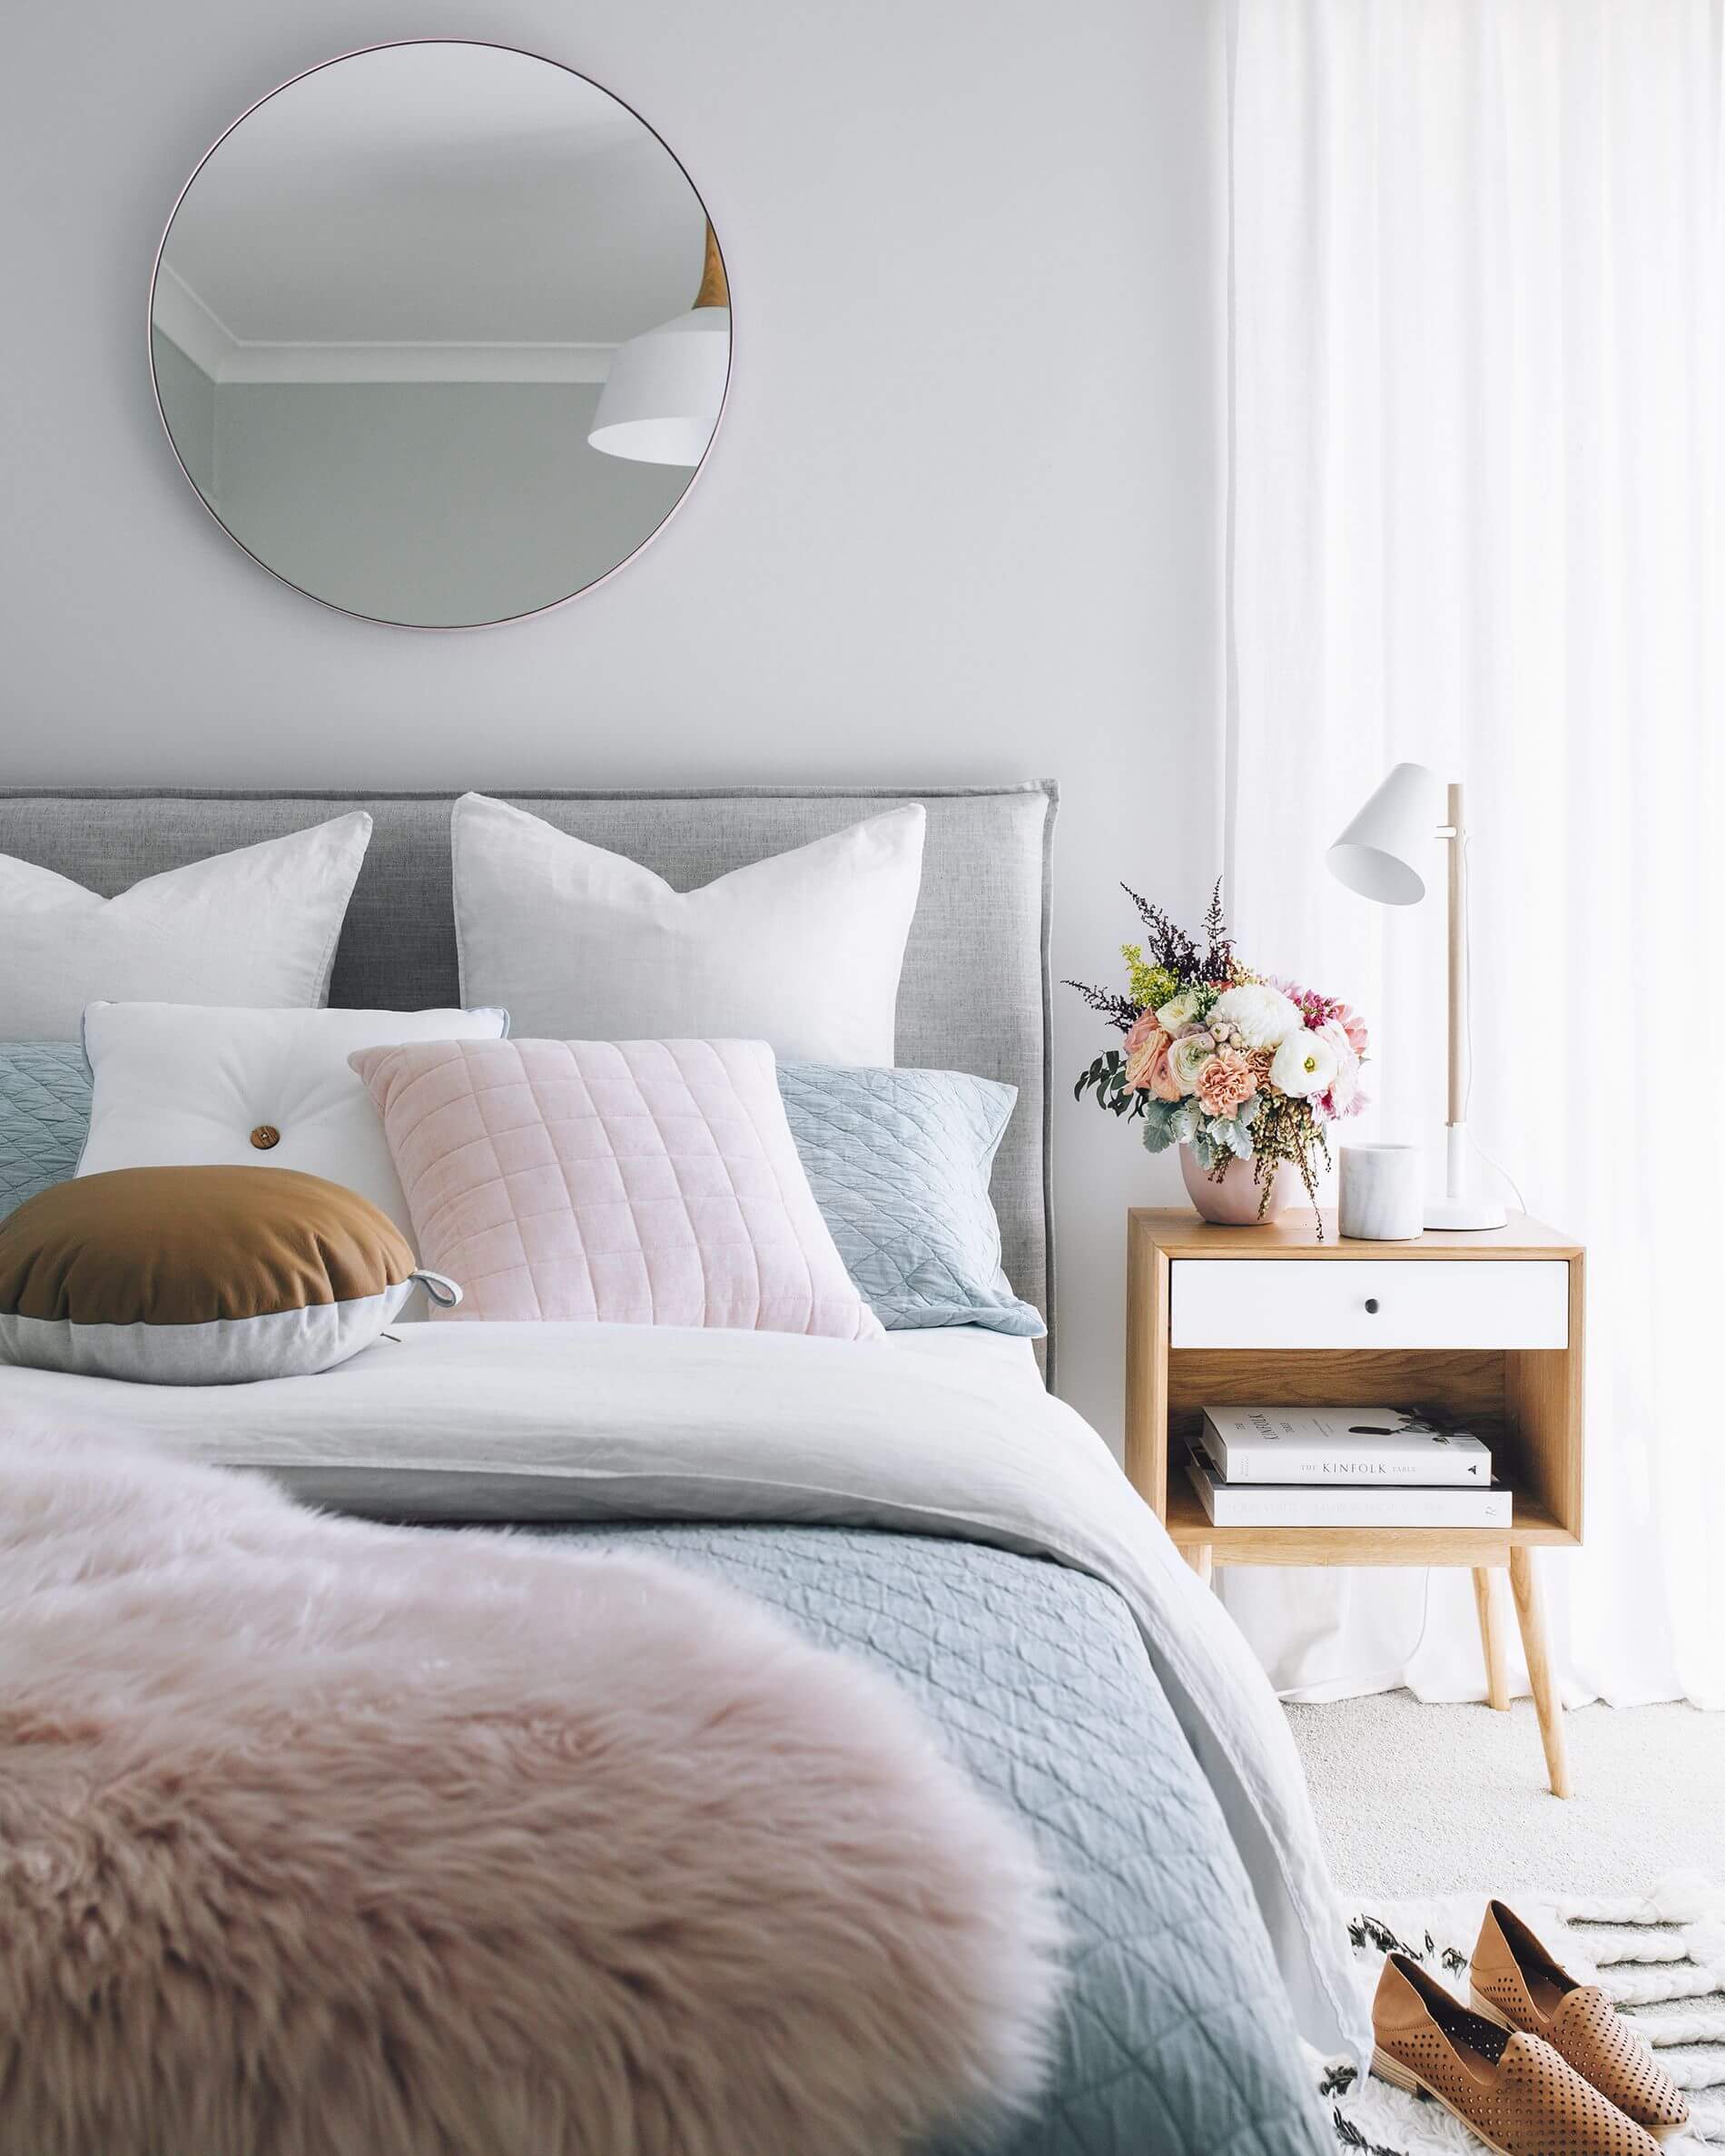 Pastel shades to soften the atmosphere (1)